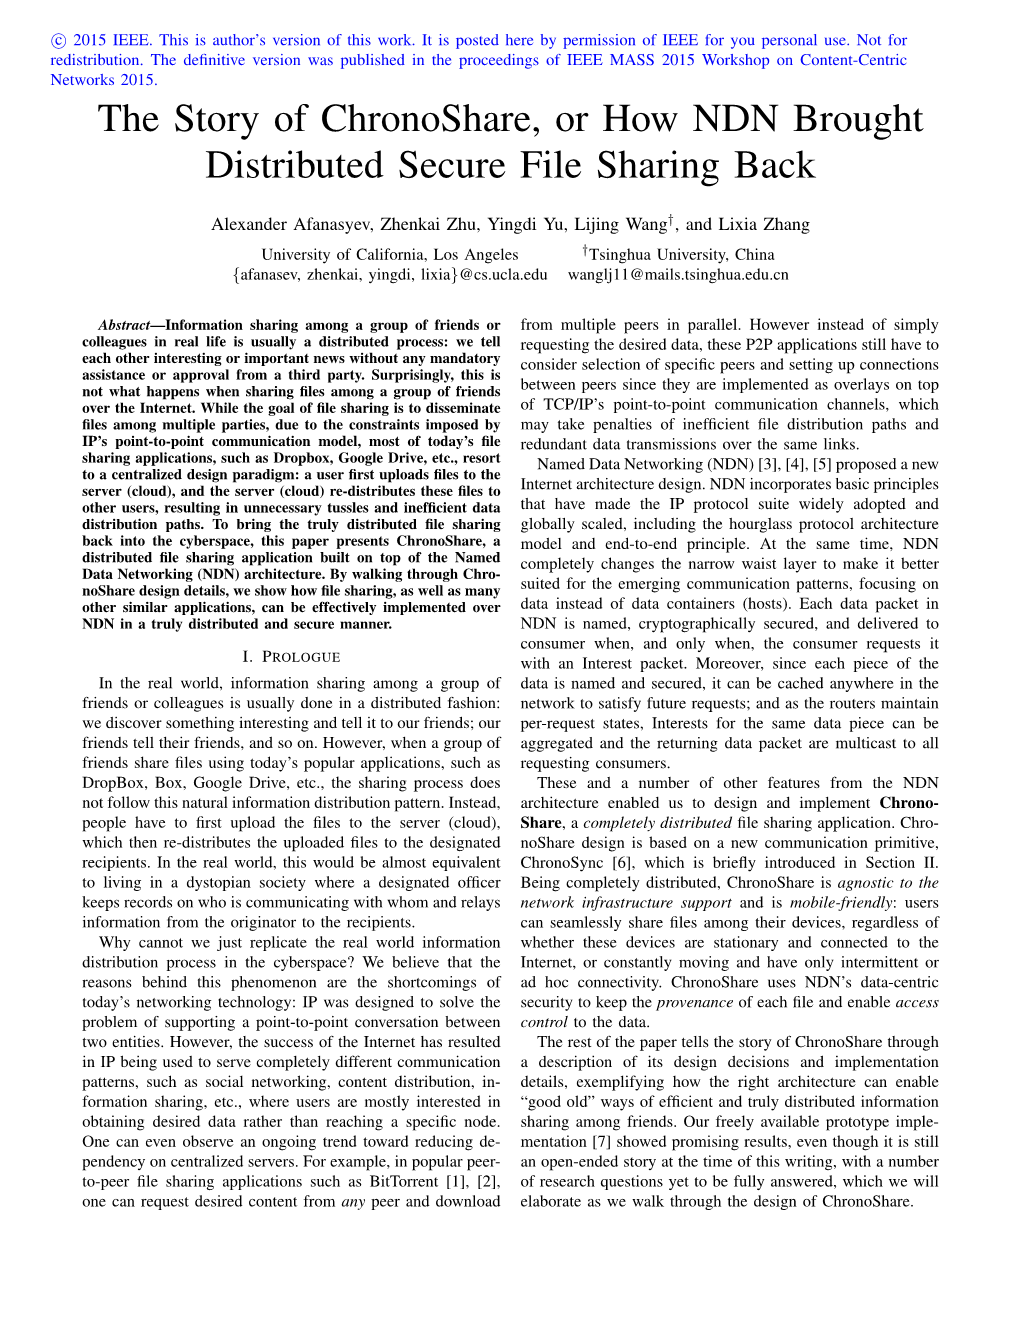 The Story of Chronoshare, Or How NDN Brought Distributed Secure File Sharing Back